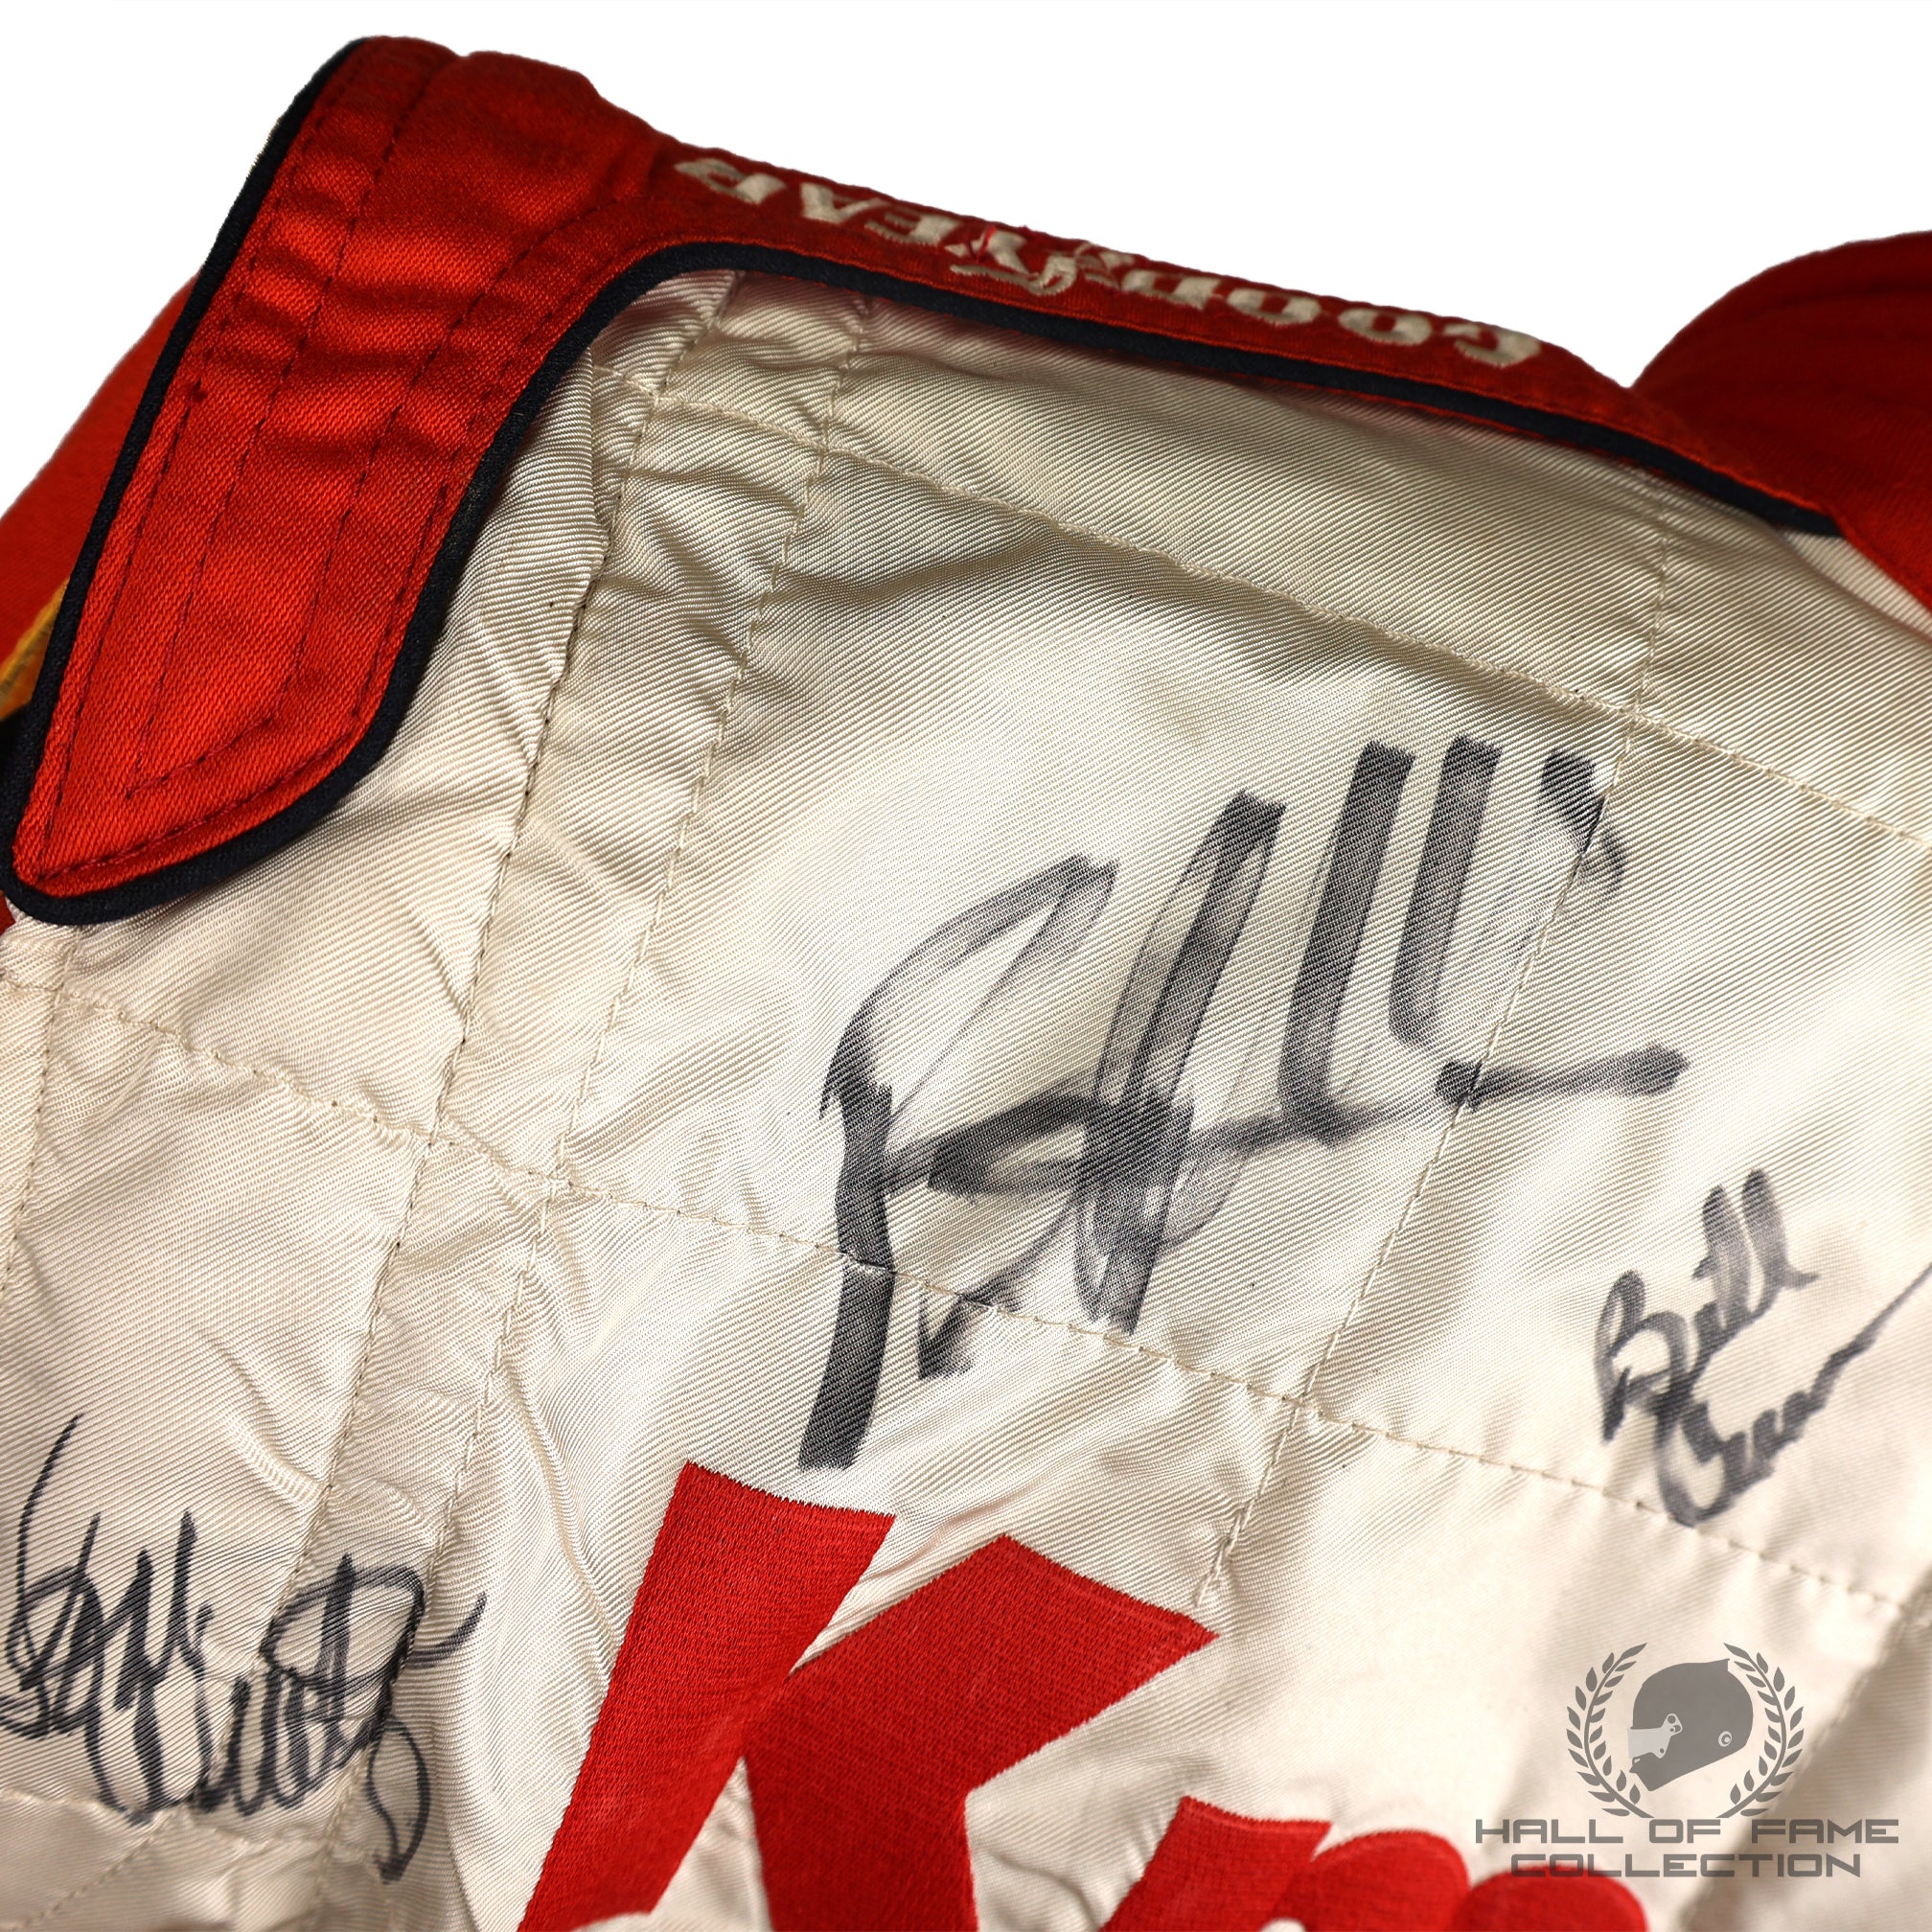 1995 Paul Tracy Signed Australia Win Newman Haas Racing IndyCar Suit